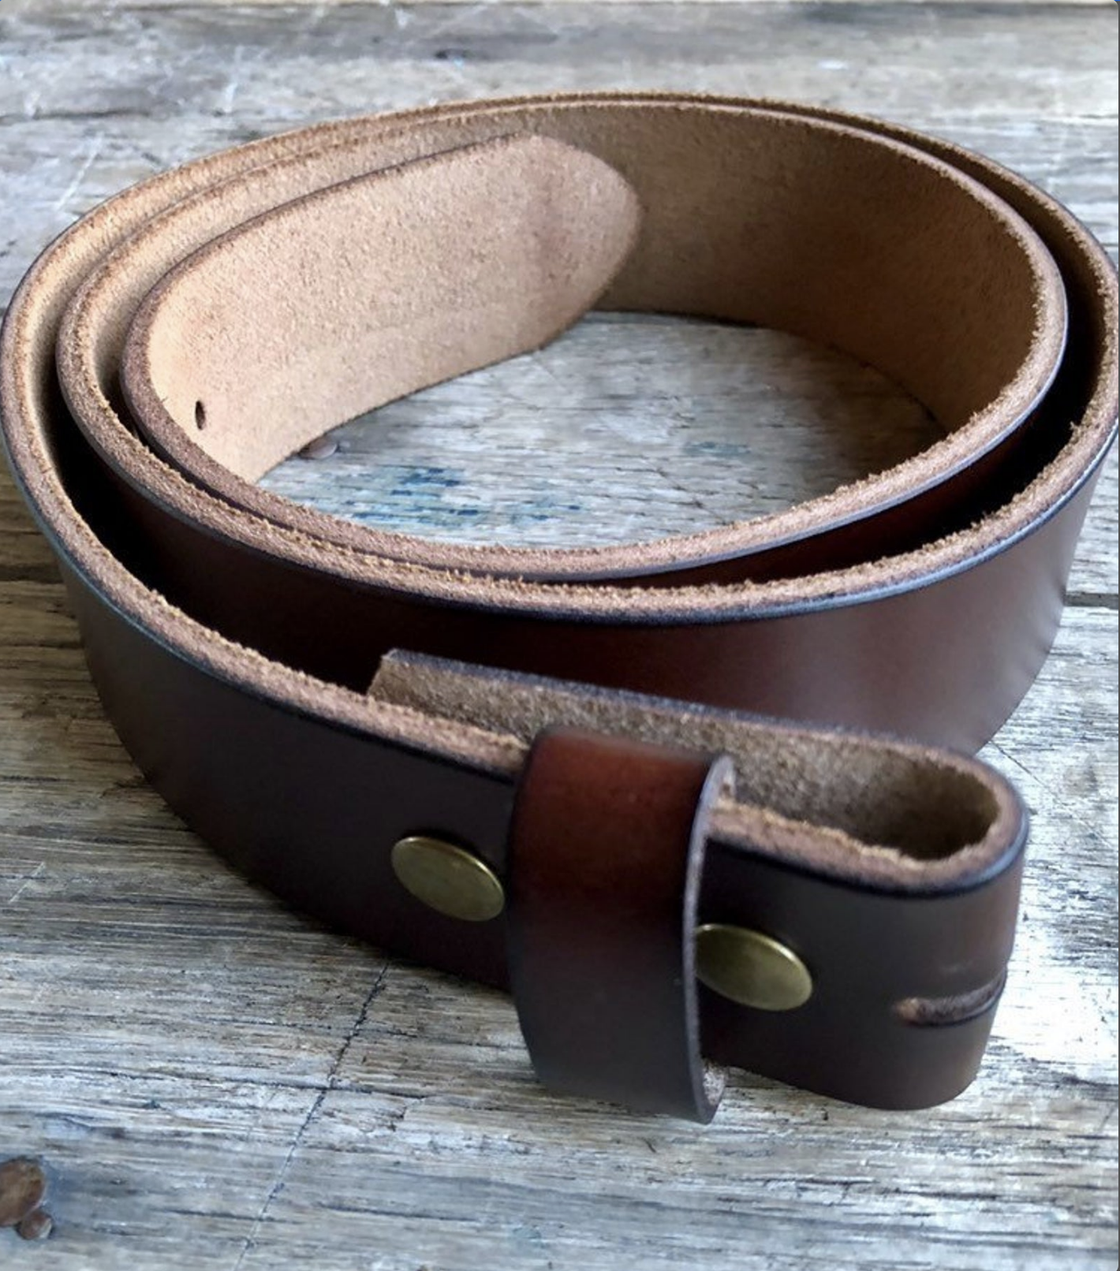 Brown leather belt strap - for use with belt buckle